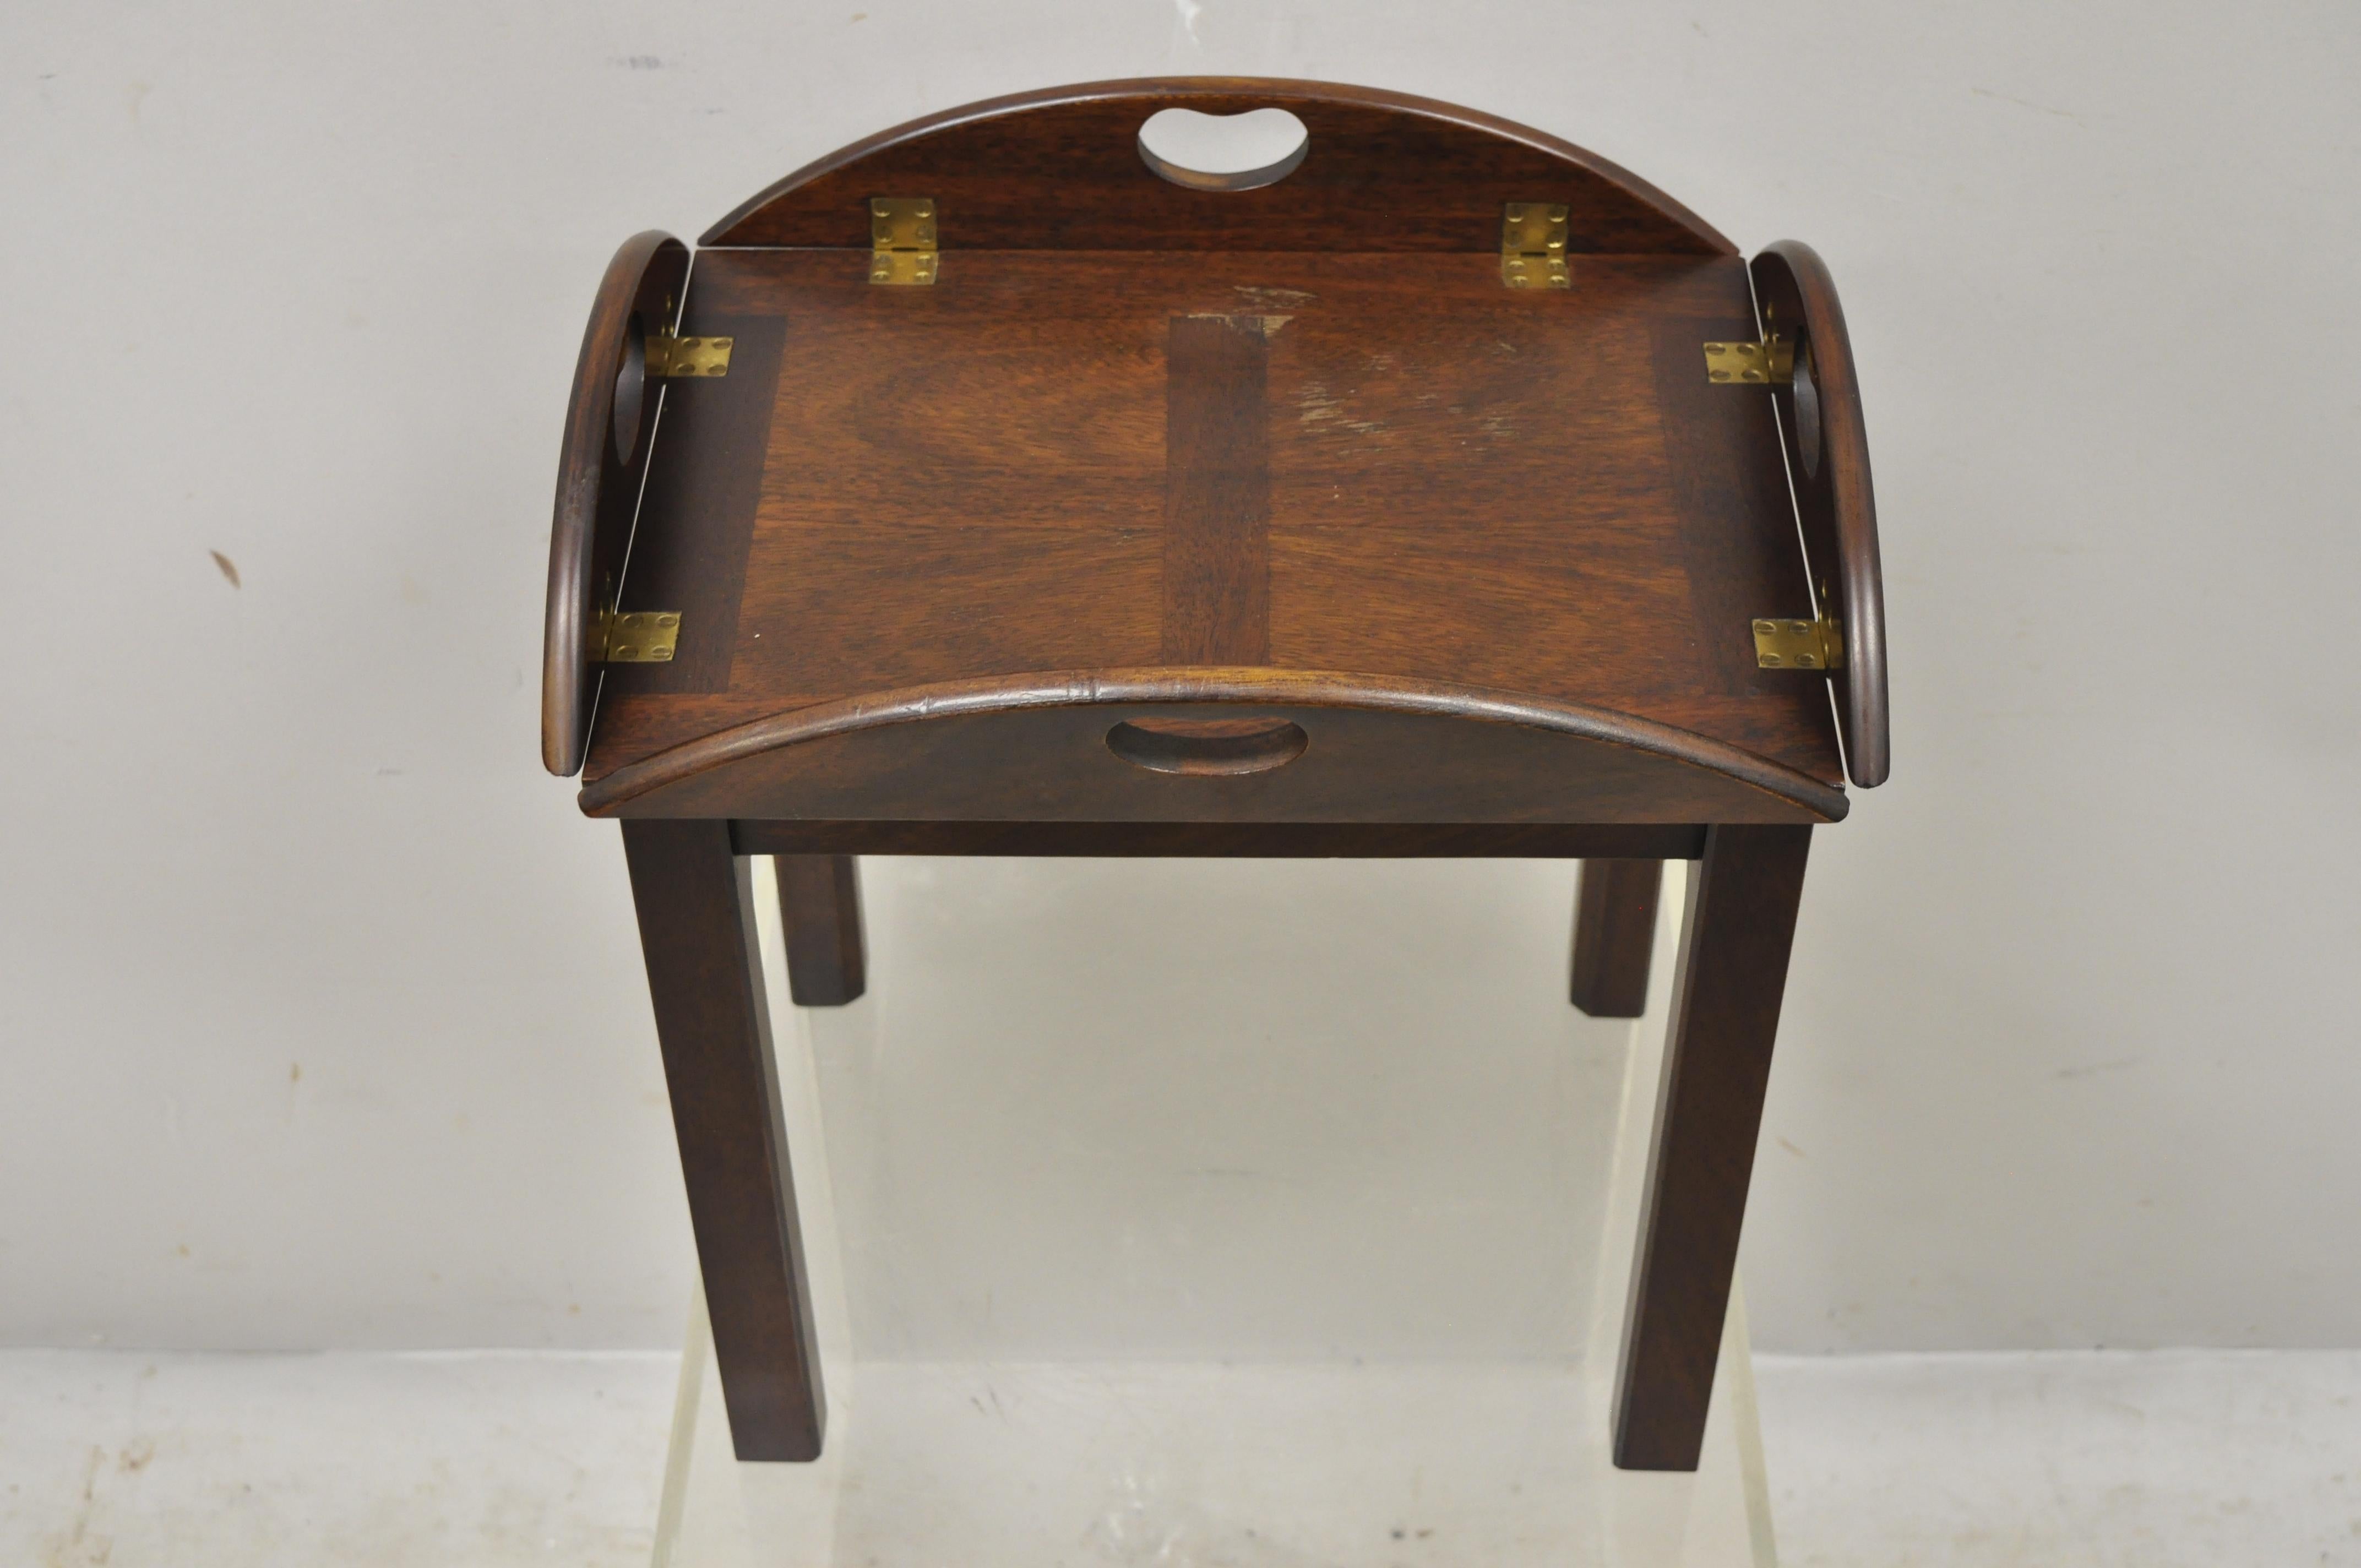 Mahogany Madison Square Furniture English Chippendale Small Butlers Coffee Side Table